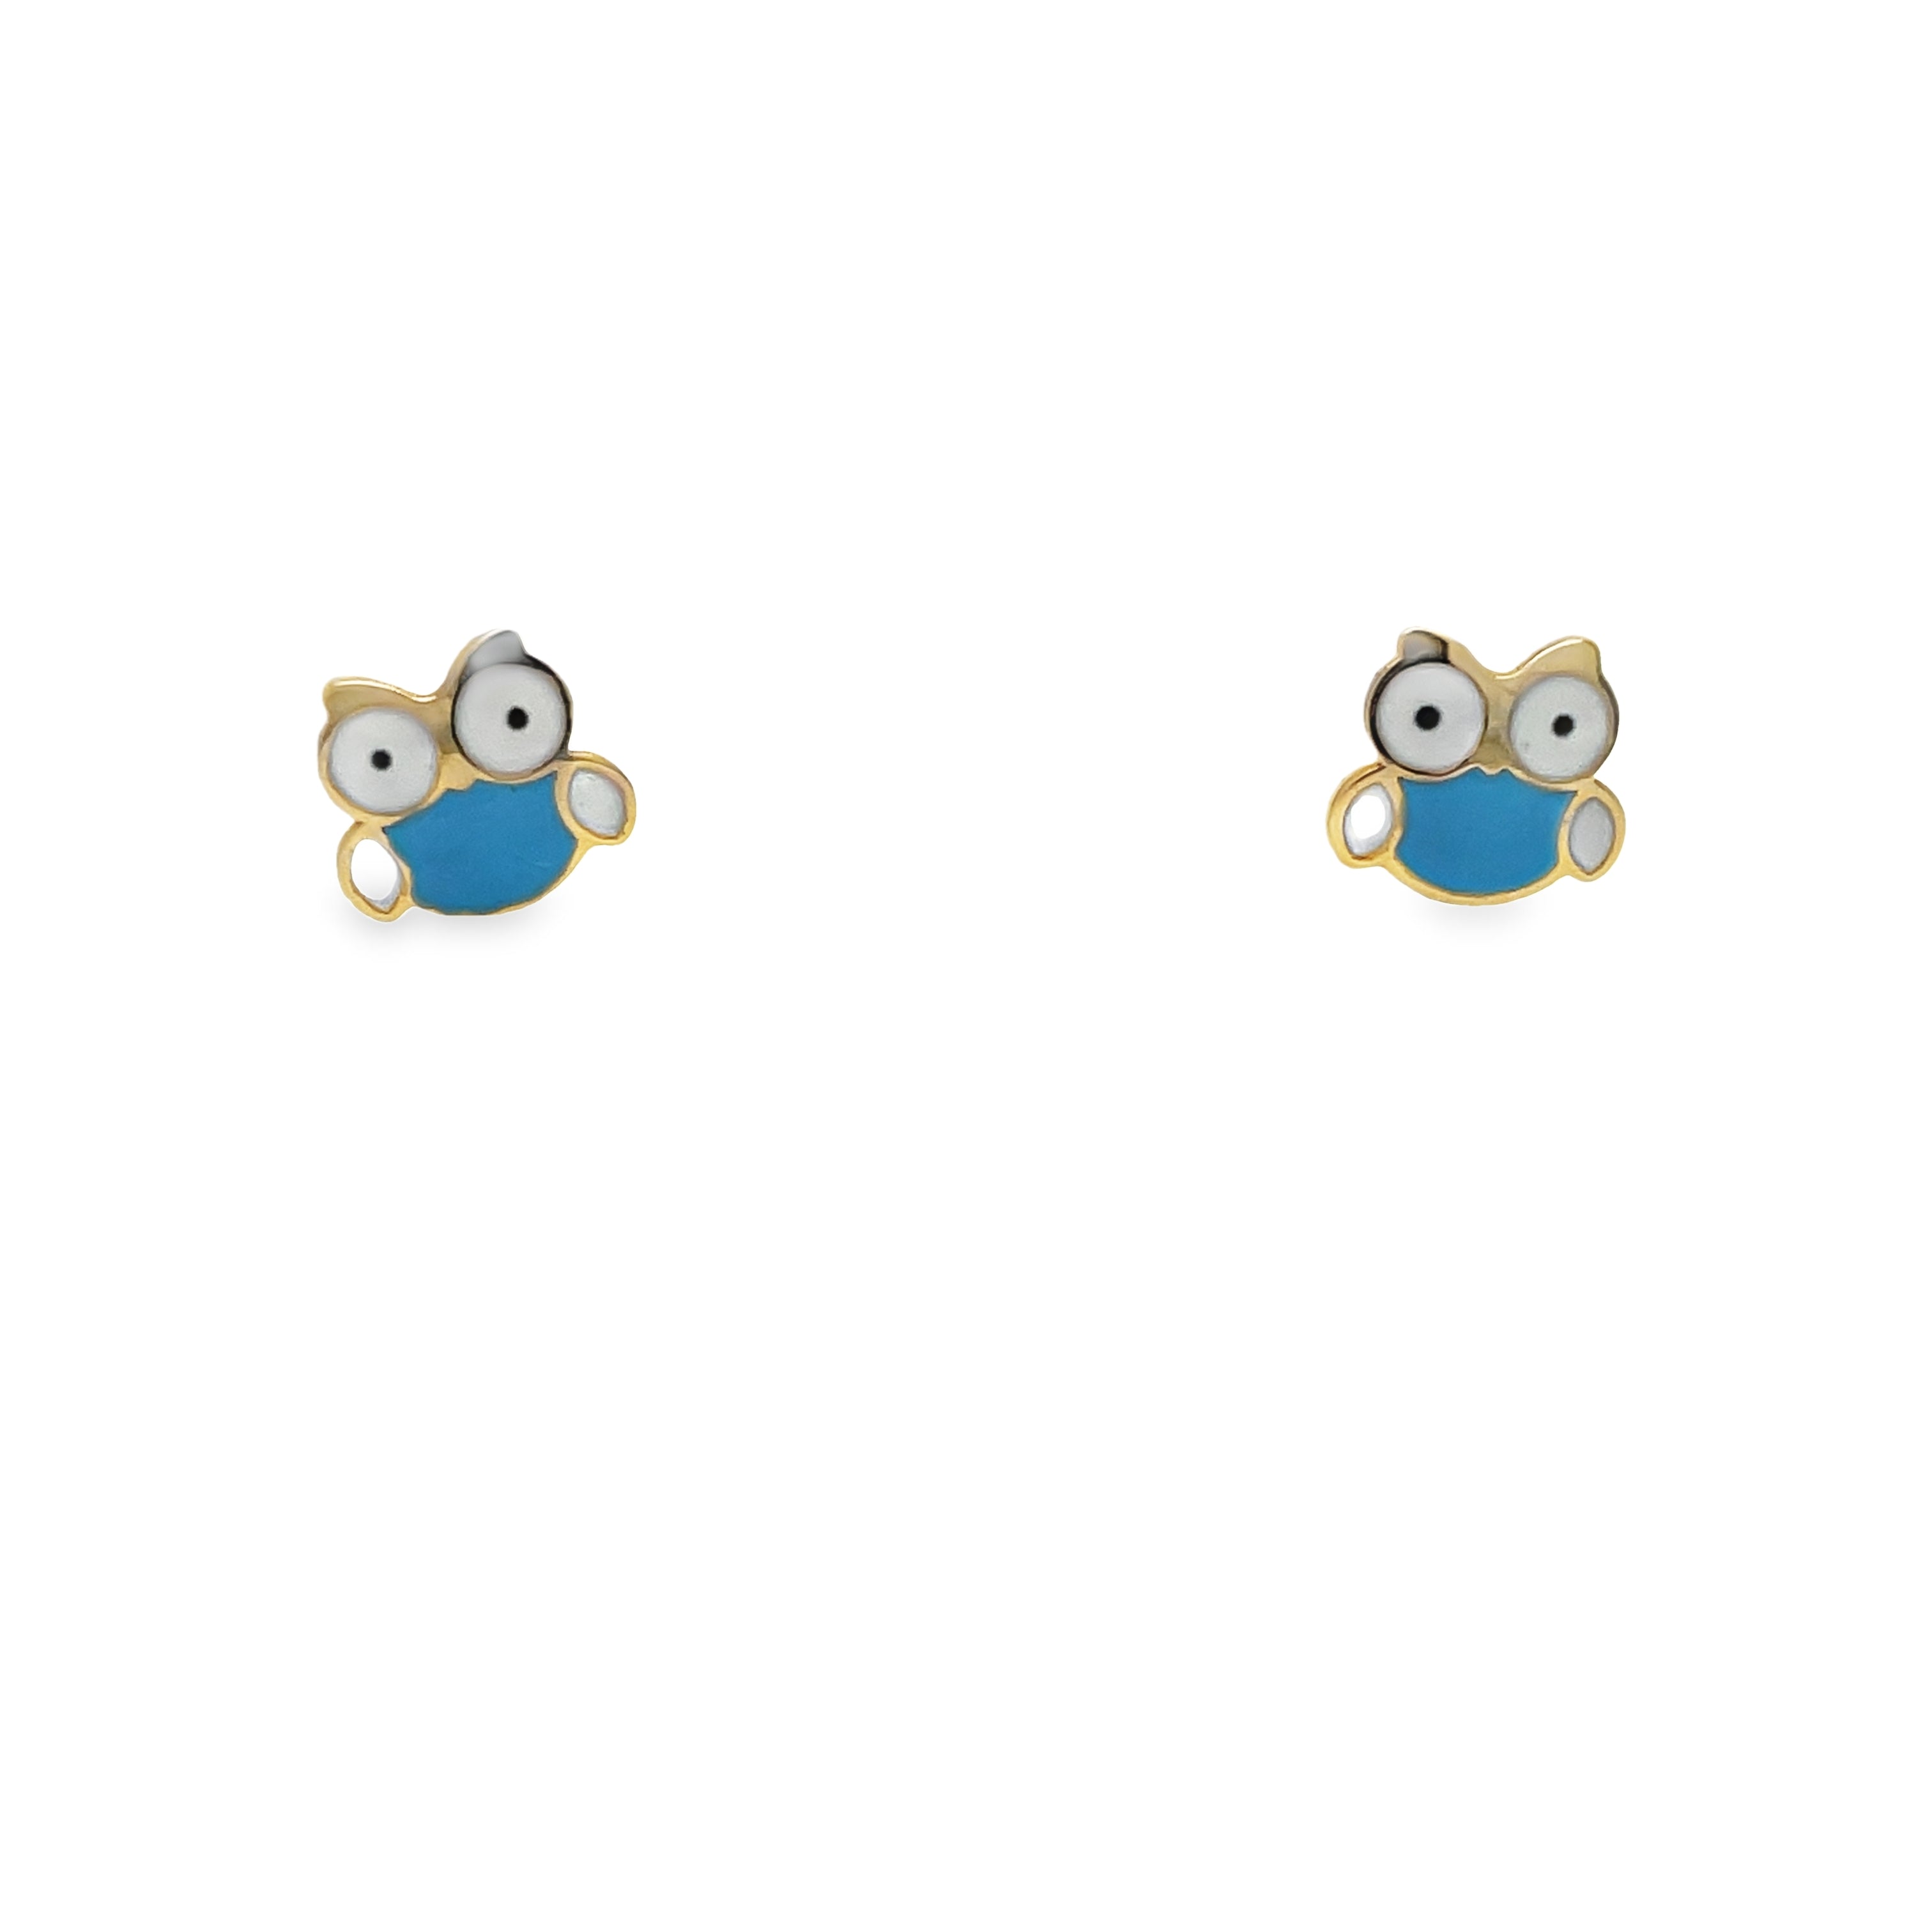 <p><span style="font-size: 0.875rem;">These exquisite flower earrings for babies feature 14k yellow gold construction with owl shape securely affixed using baby screw backs.</span></p> <p>&nbsp;</p>